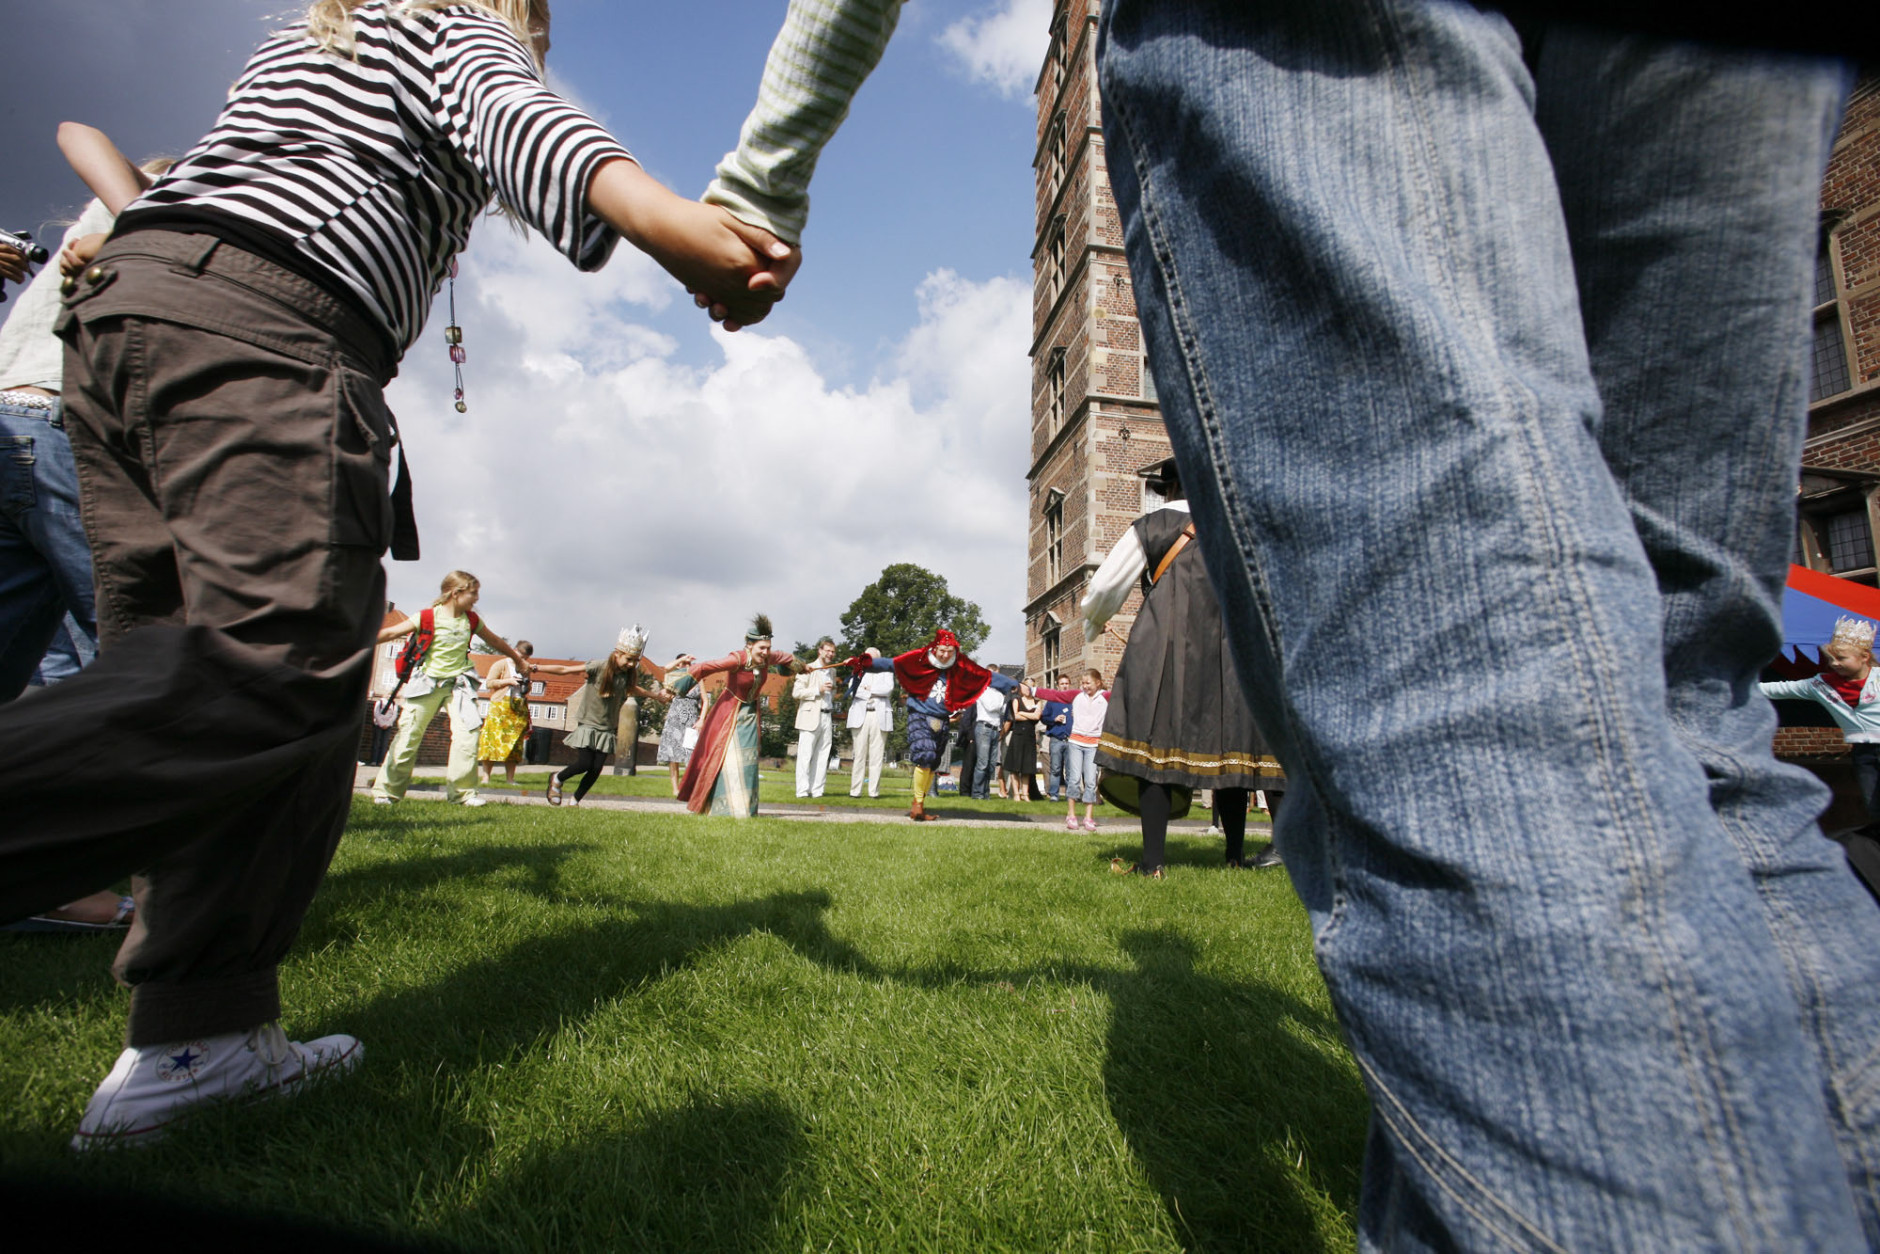 People in medieval dress dance with children on the lawns of the historic Rosenberg Castle in Copenhagen, Denmark Thursday Aug. 24, 2006 during a press preview for the month-long Golden Days renaissance event which will take place in Copenhagen in September. (AP Photo/John McConnico)